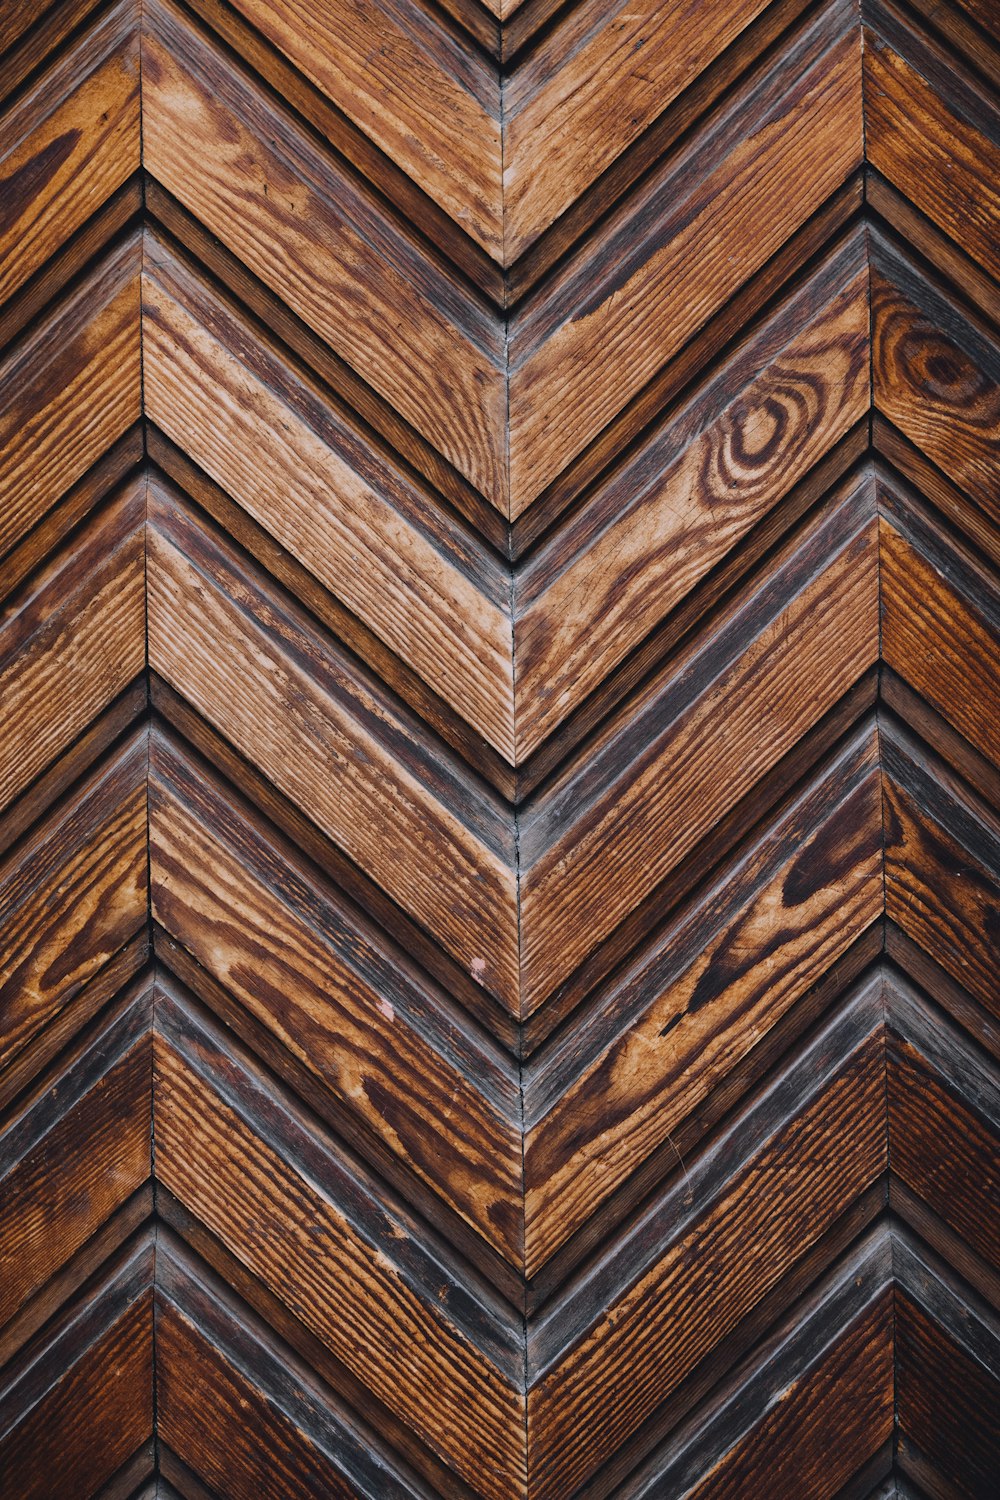 a close up view of a wooden wall